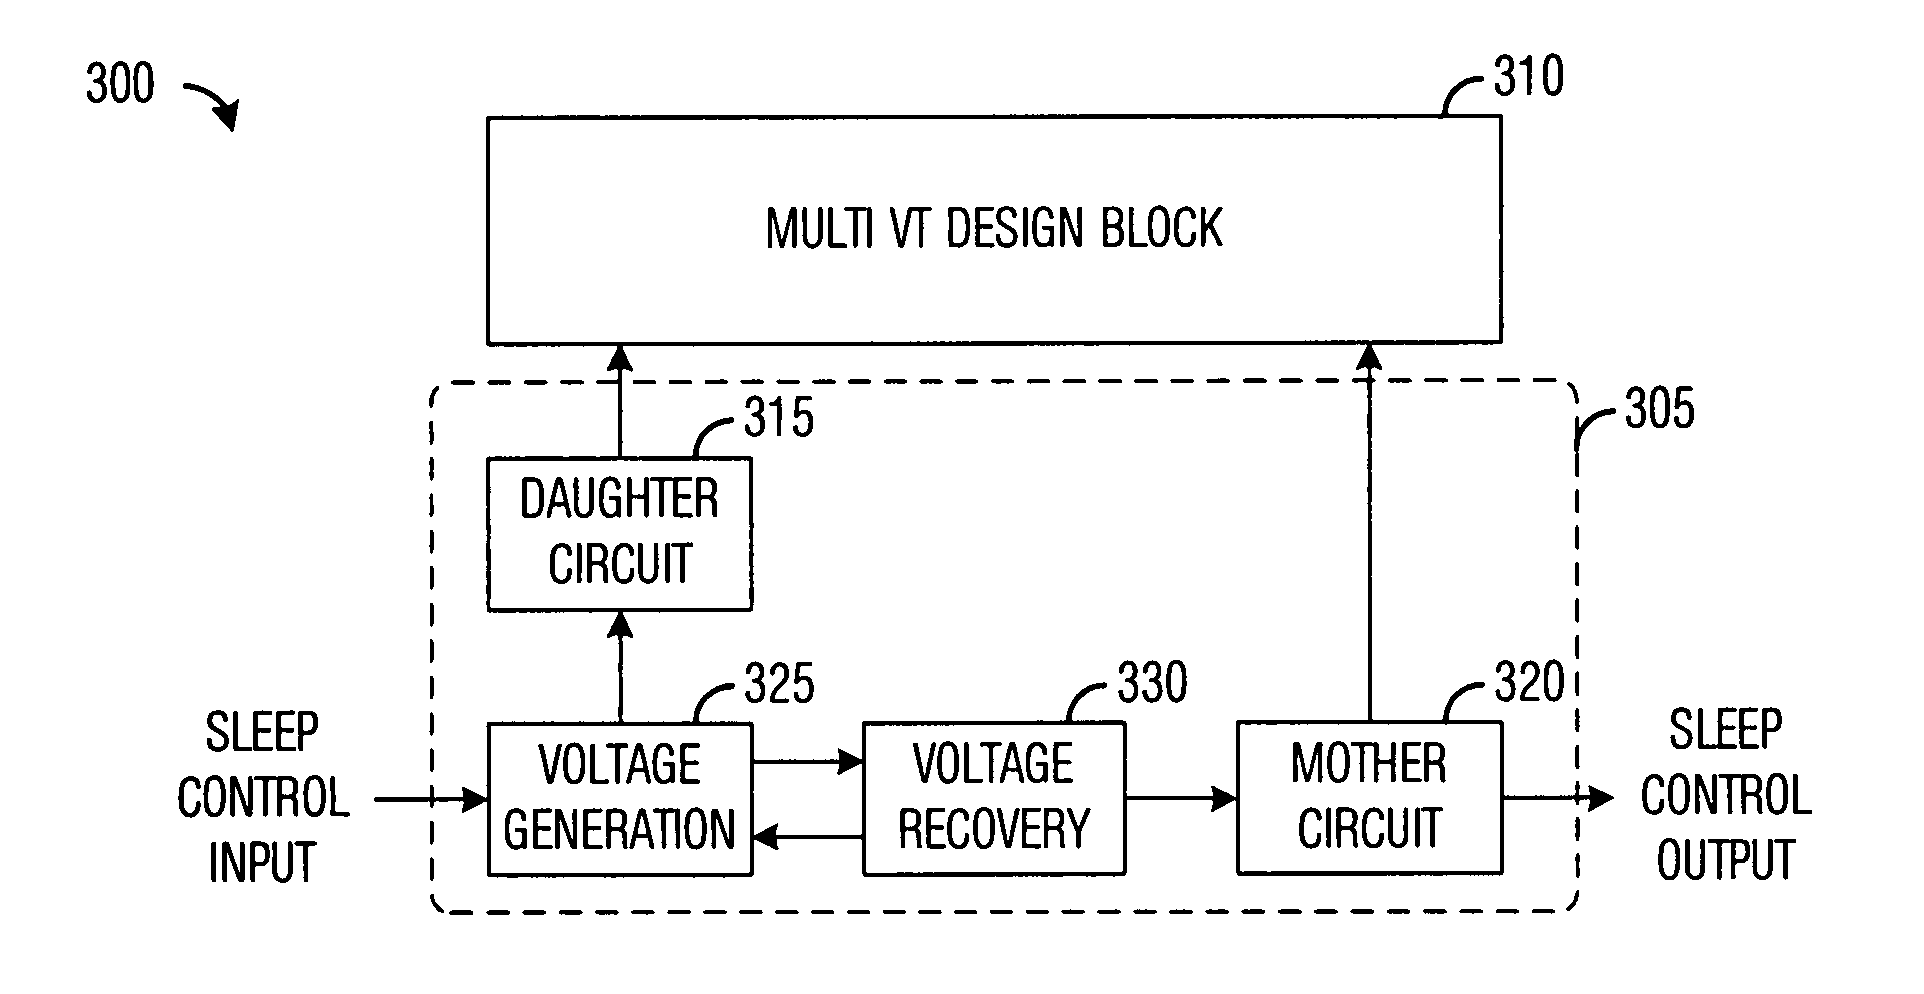 Mother/daughter switch design with self power-up control